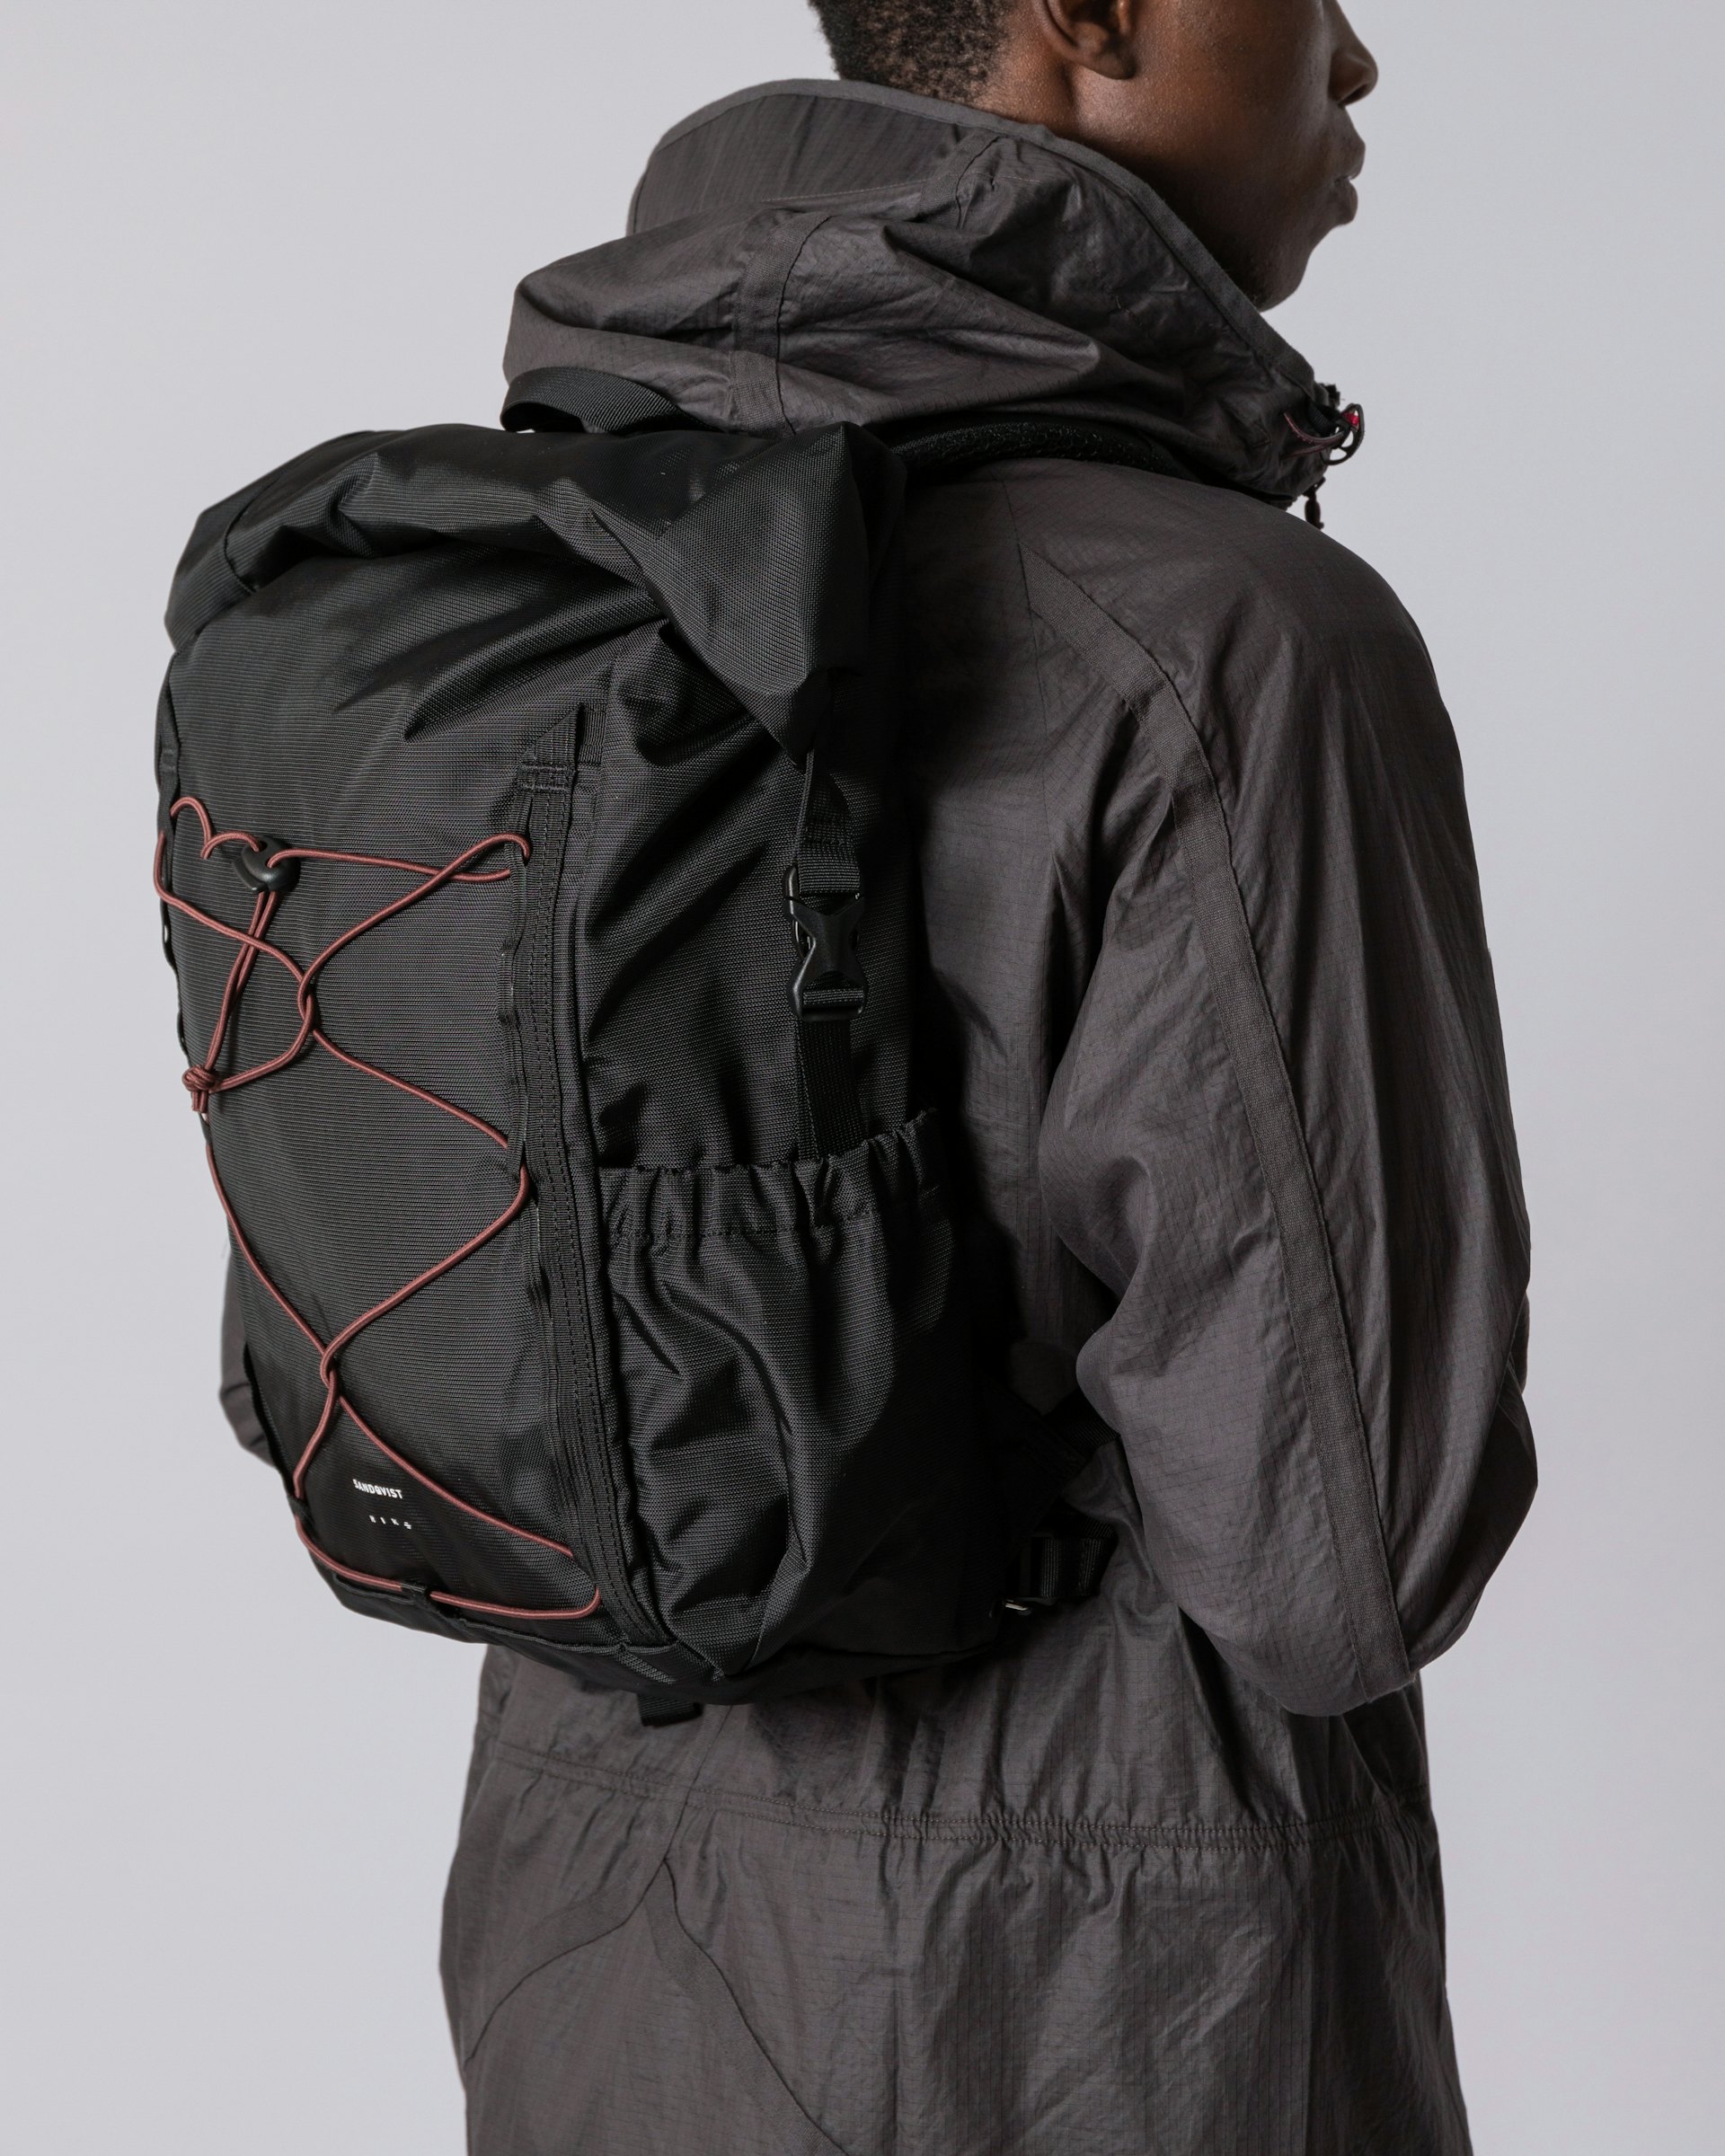 Valley Hike belongs to the category Backpacks and is in color black (7 of 7)